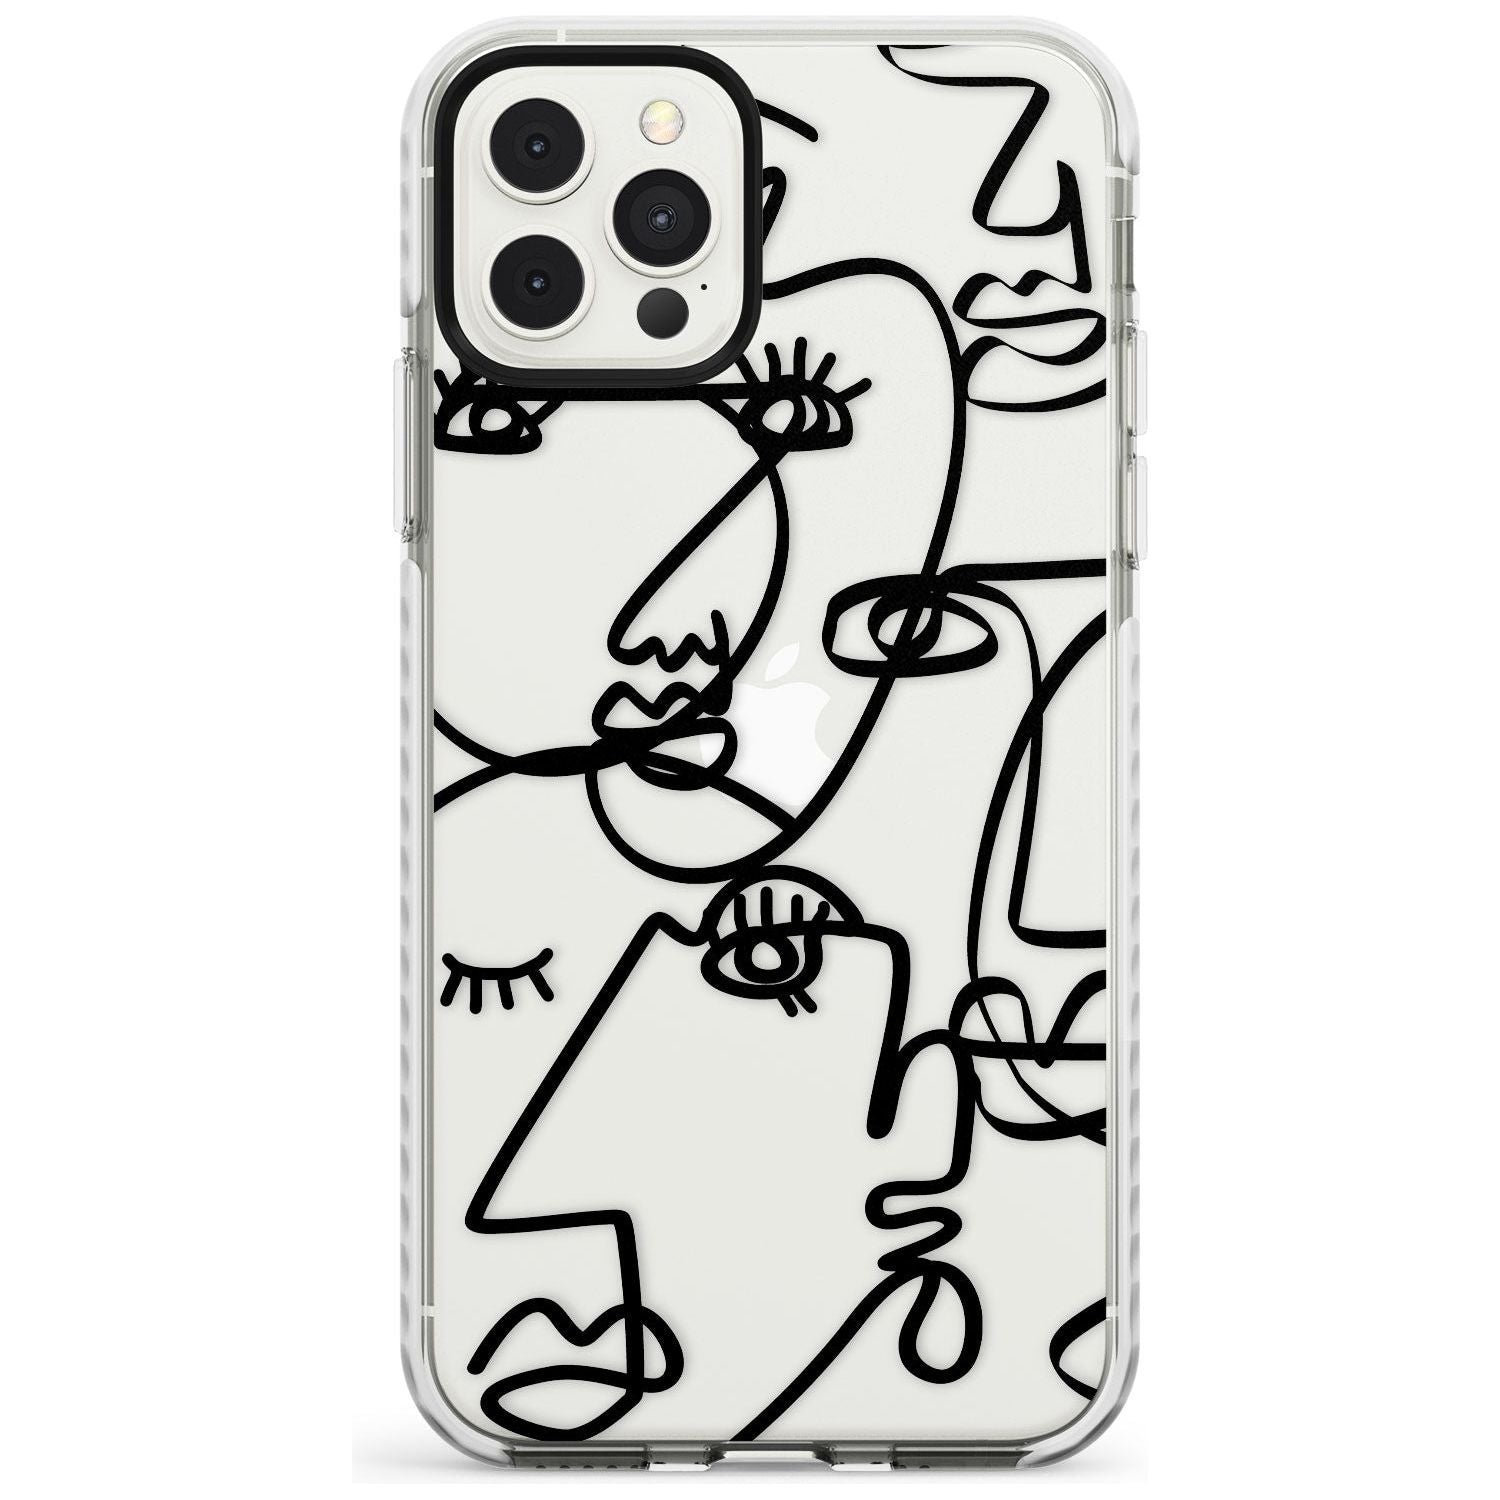 Continuous Line Faces: Black on Clear Slim TPU Phone Case for iPhone 11 Pro Max